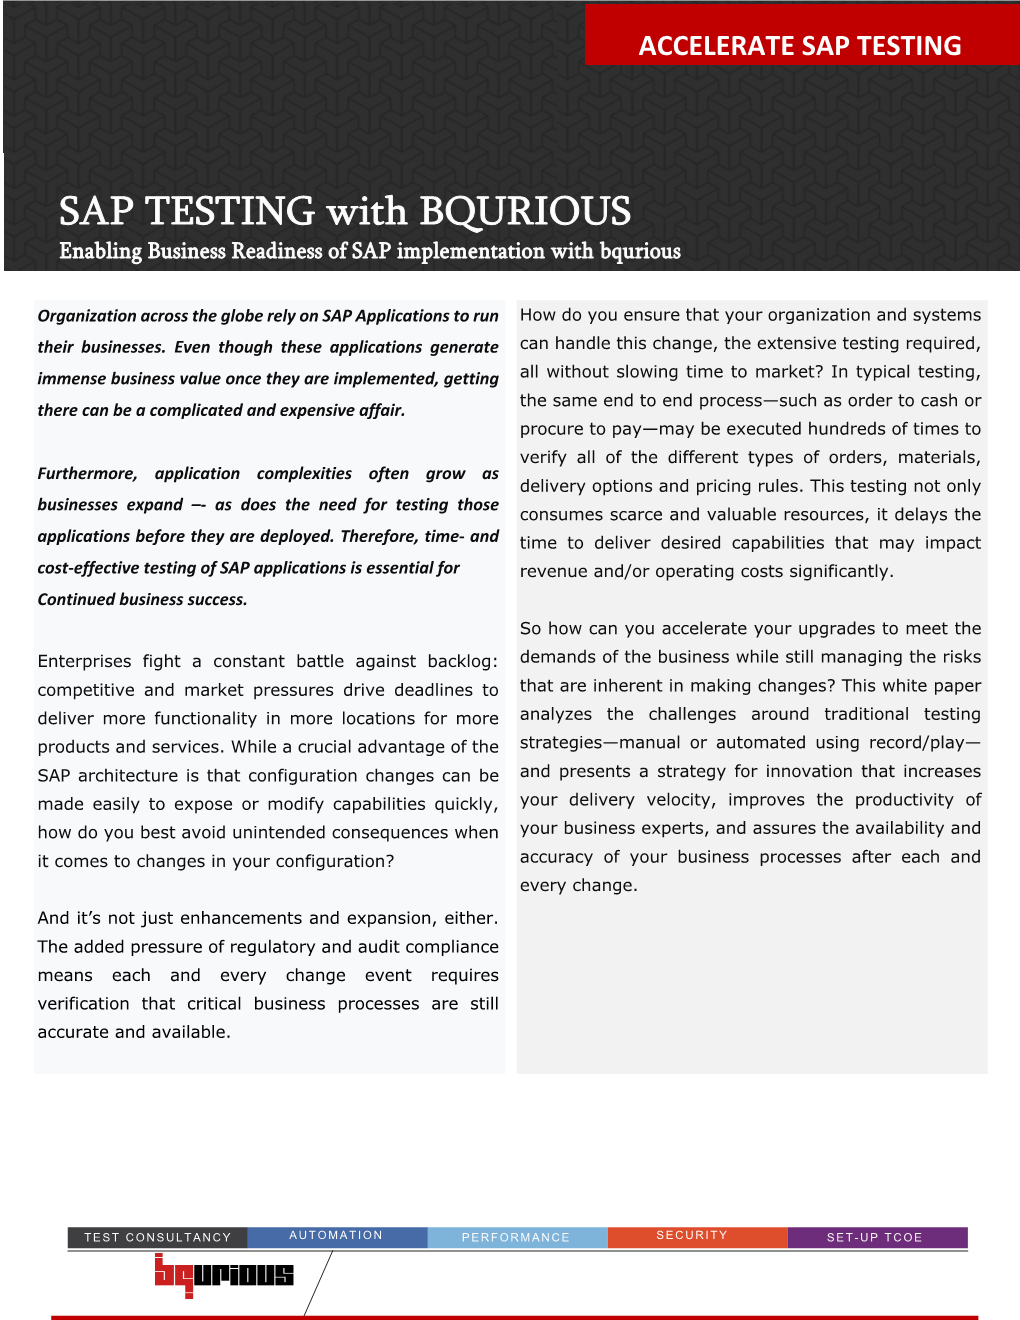 SAP TESTING with BQURIOUS Enabling Business Readiness of SAP Implementation with Bqurious